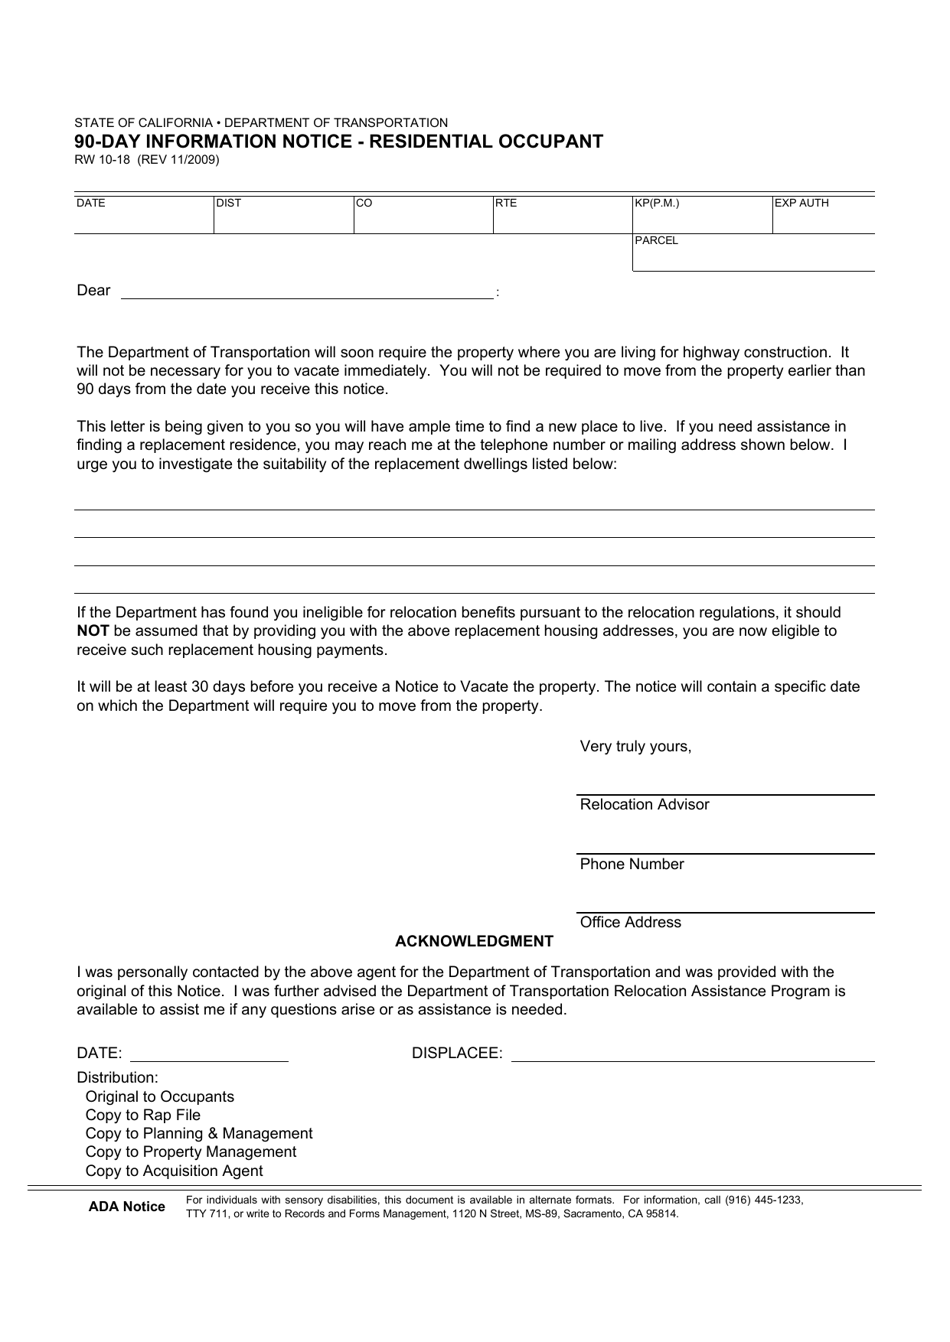 Form RW10-18 90-day Information Notice - Residential Occupant - California, Page 1